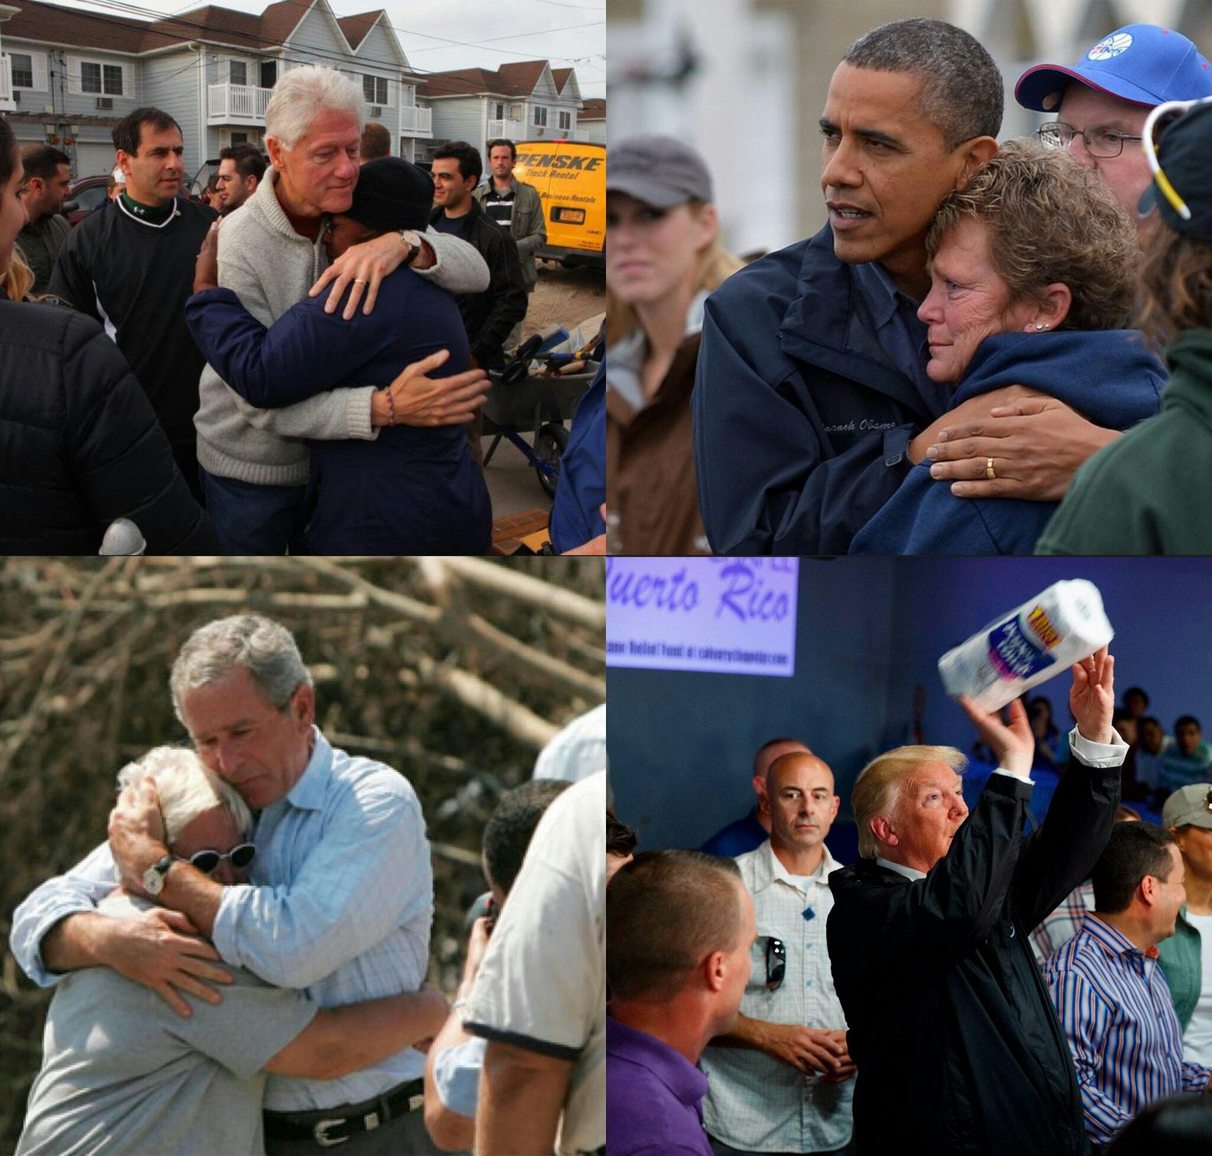 Presidents' support during disasters - meme